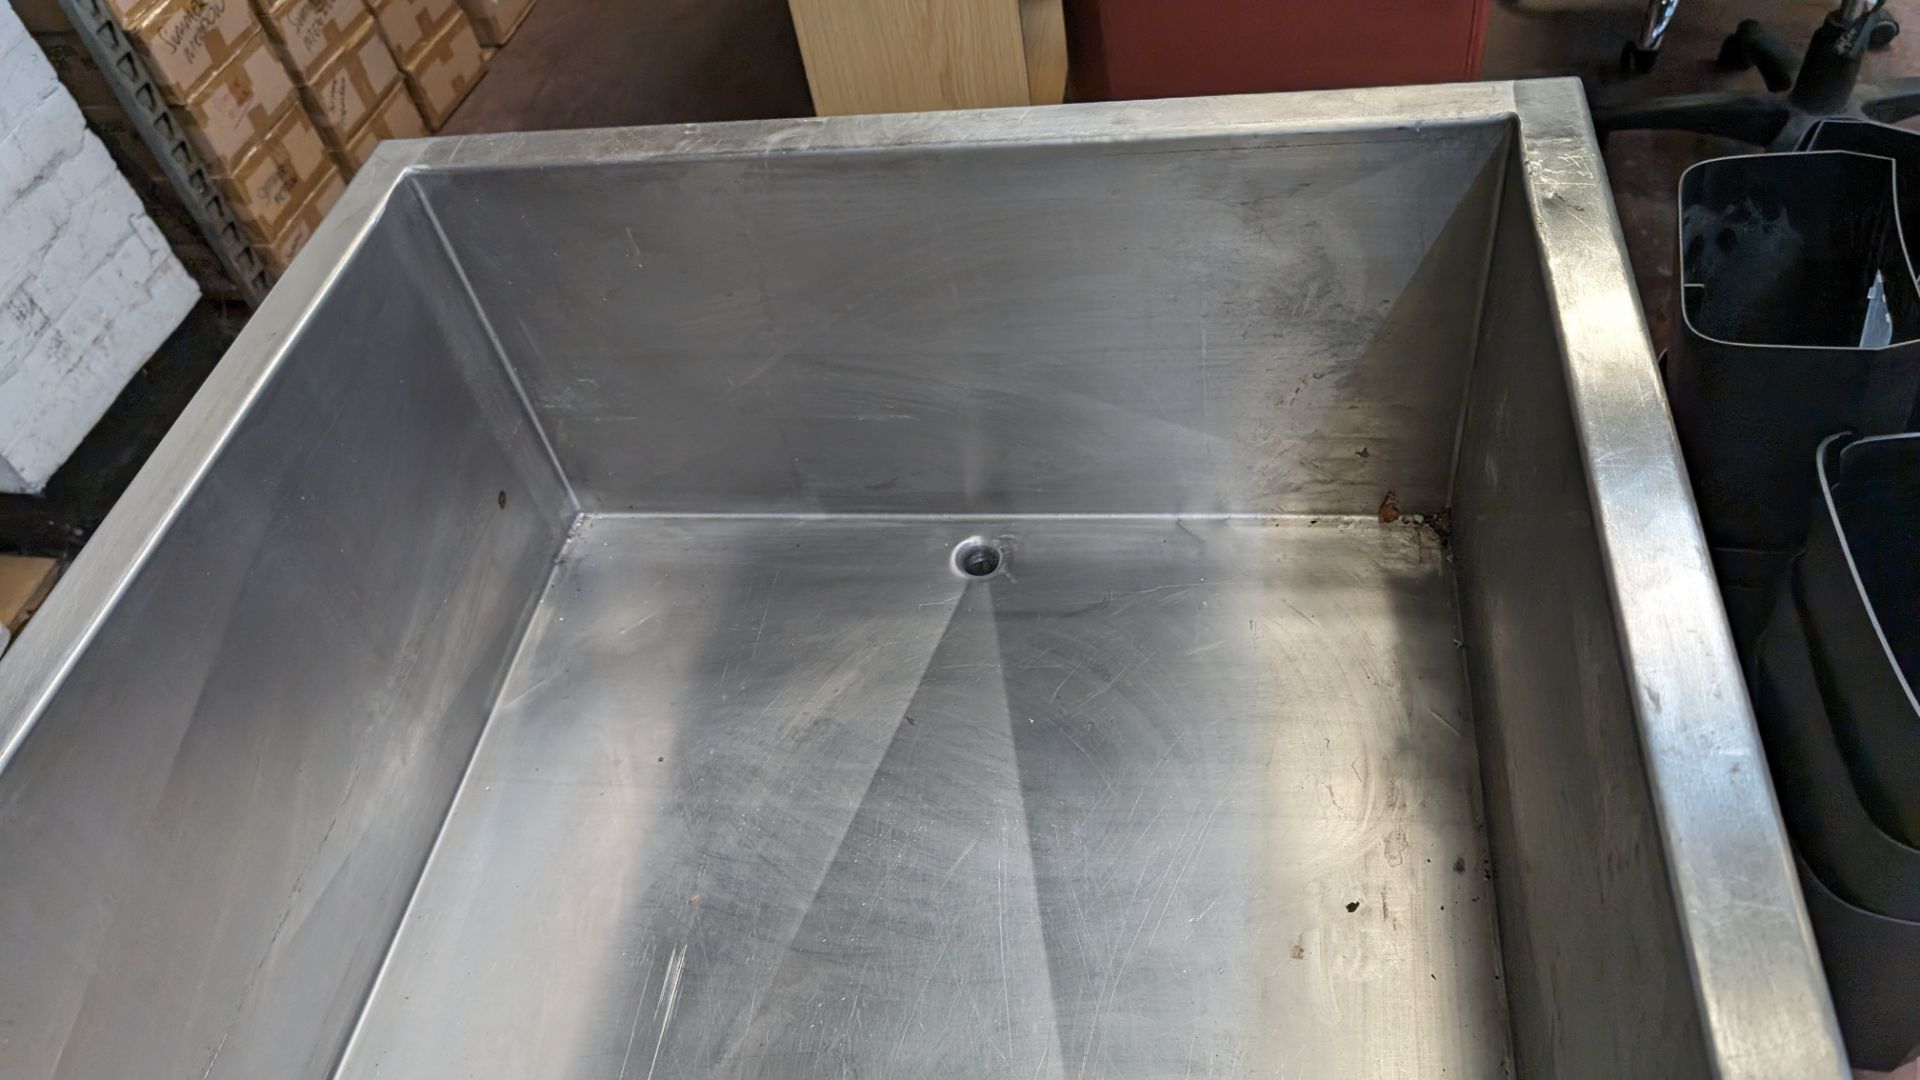 Mobile mozzarella hardening tank. Understood to have been bought in 2018 - Image 4 of 11